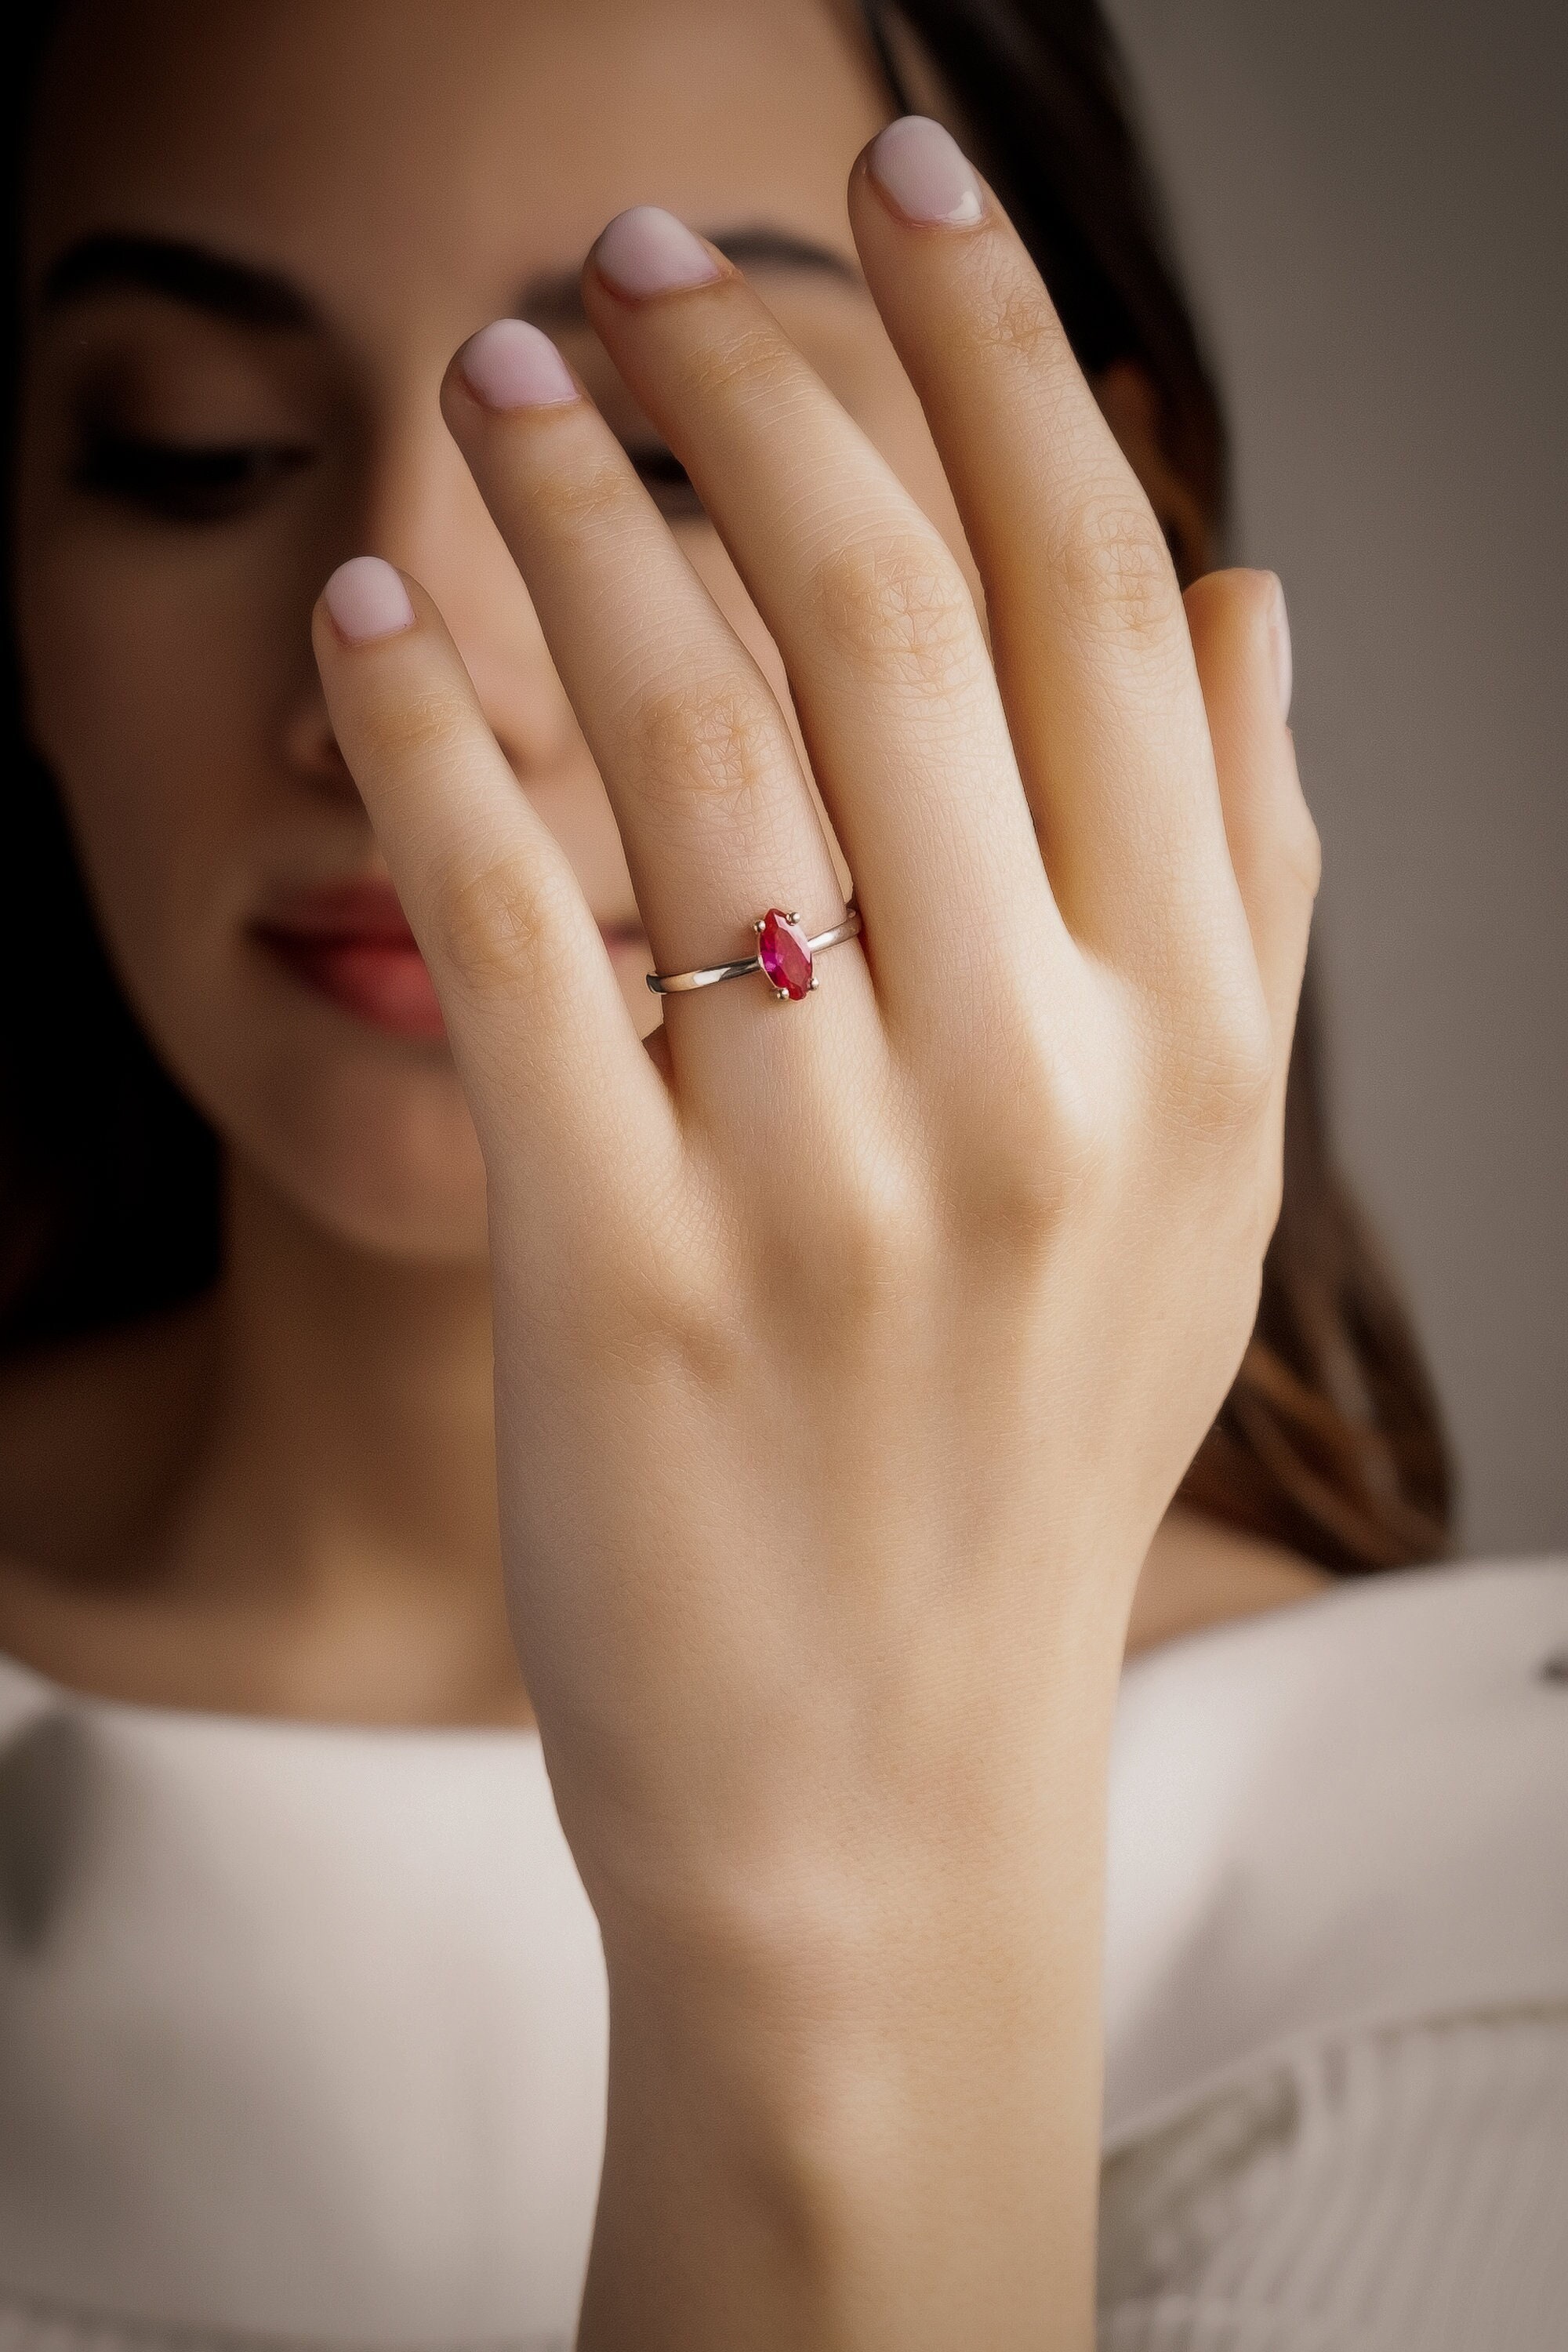 Yuzuk Red Ruby Cluster Ruby Ring Elegant Silver Wedding & Engagement  Jewelry For Women In Rose Gold Color From Zhailanyea, $11.19 | DHgate.Com